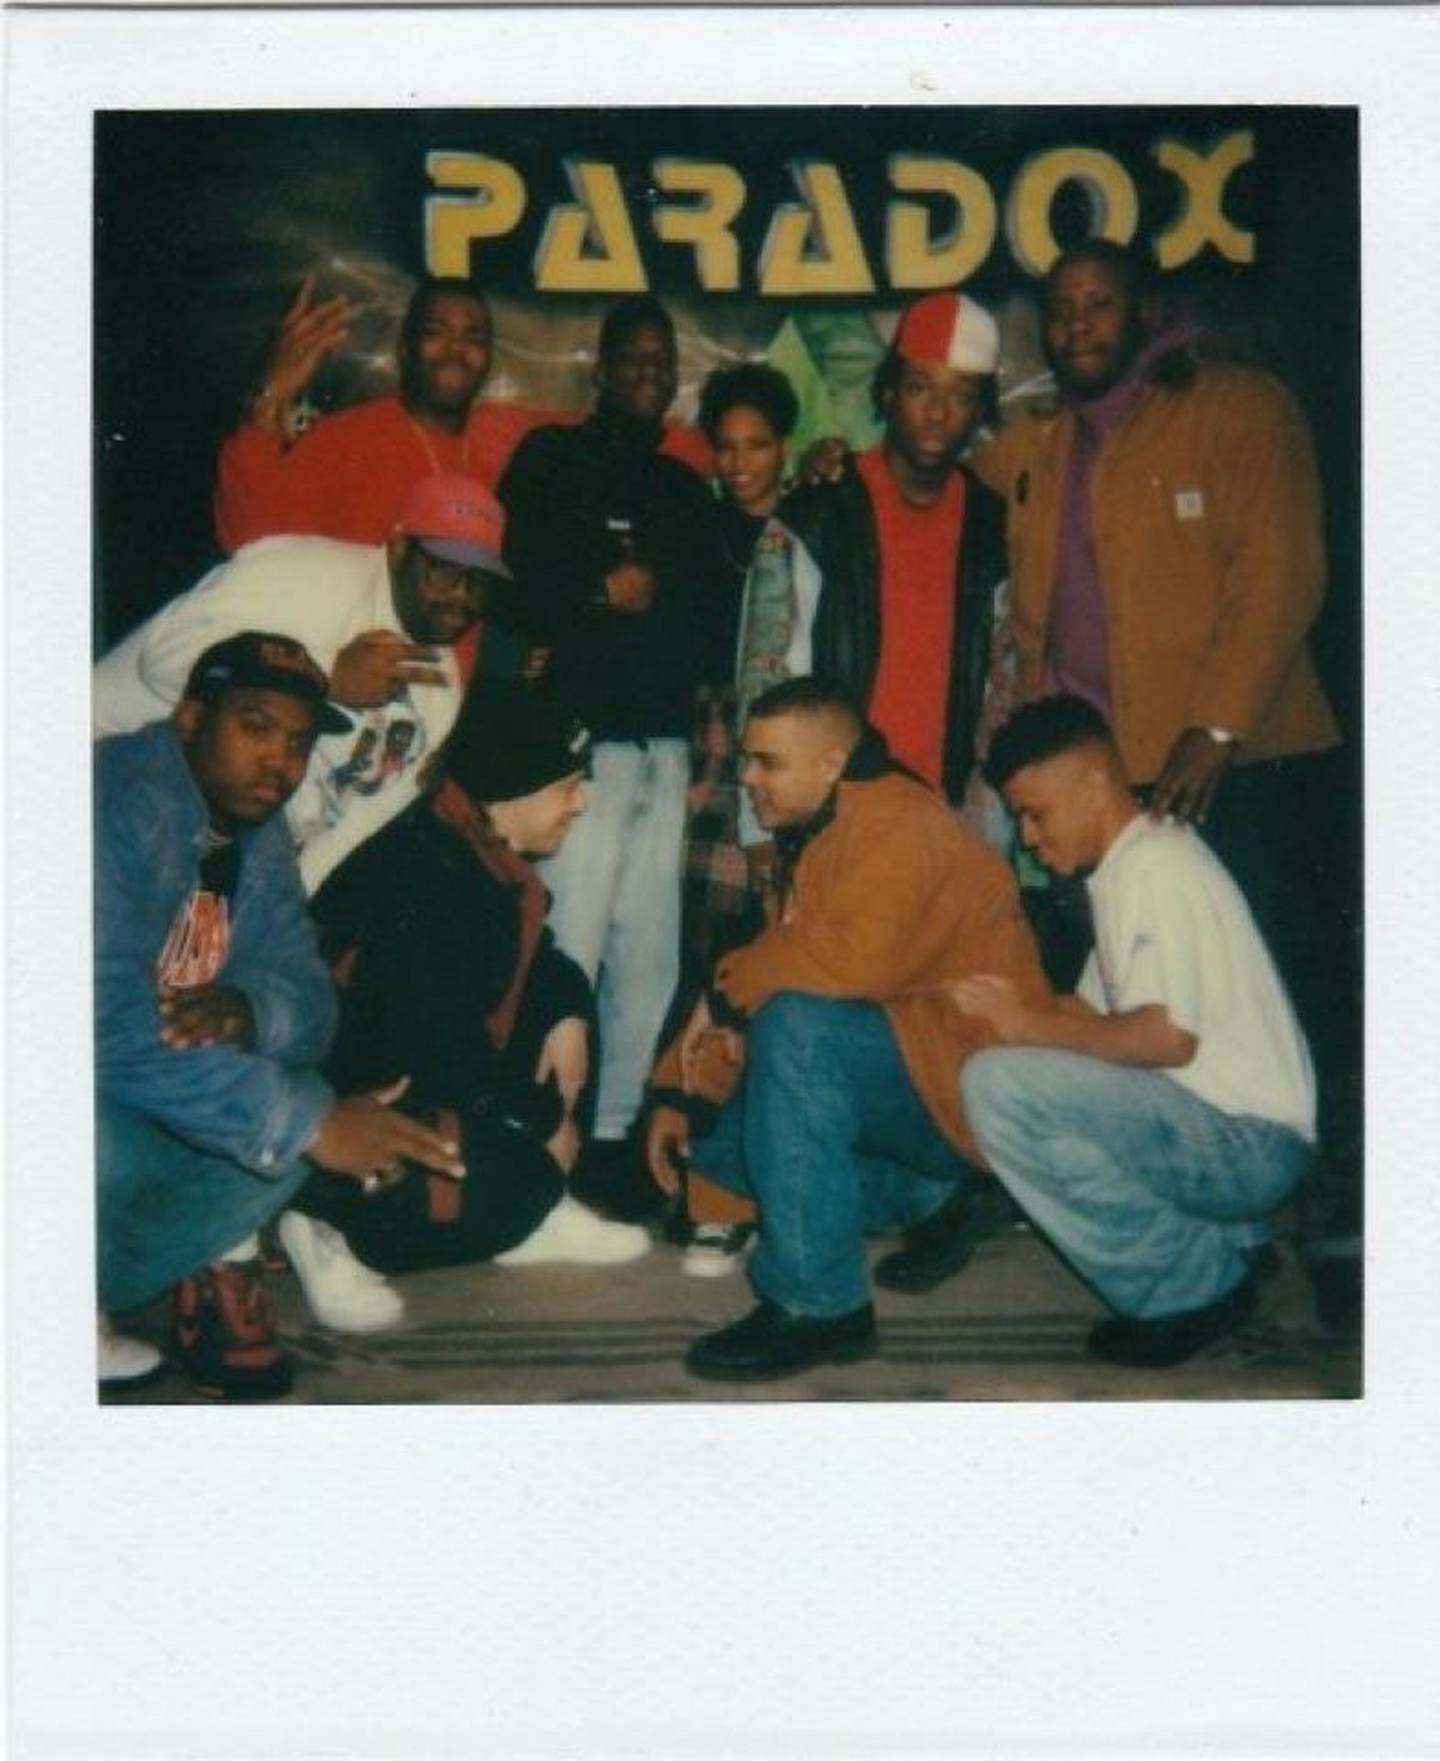 A throwback photo of a night at the Paradox club in Baltimore.